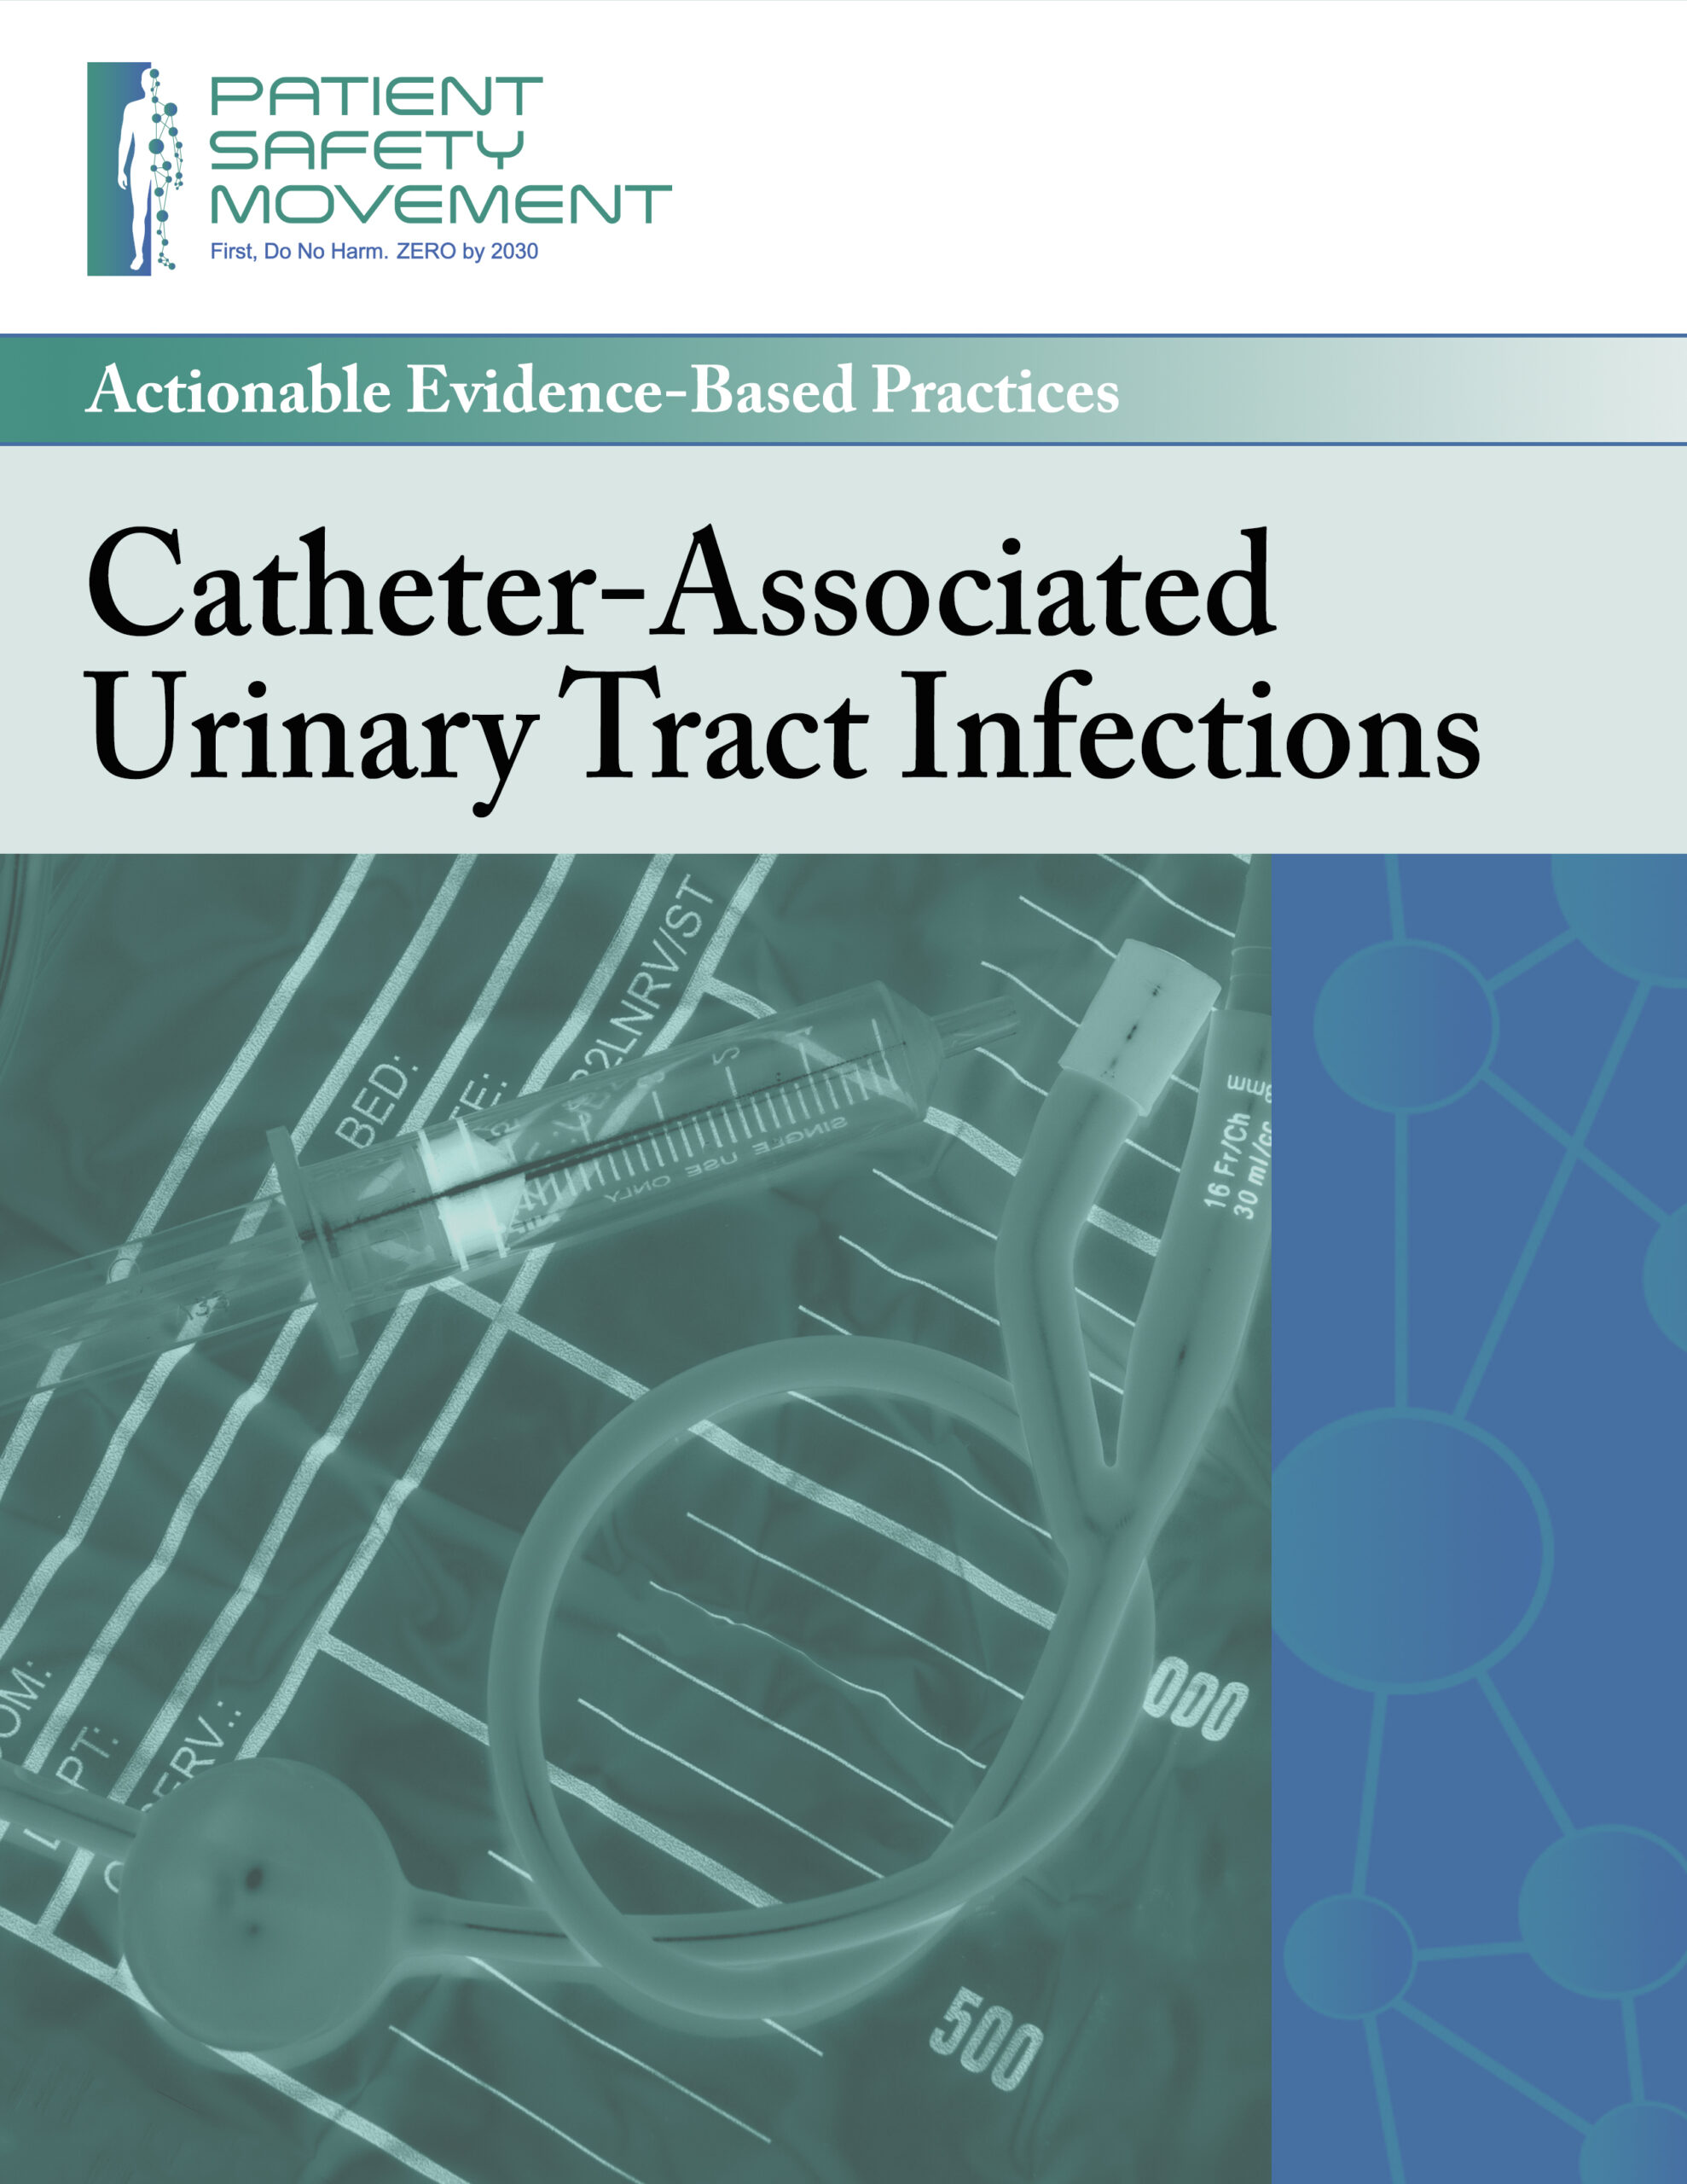 Catheter-Associated Urinary Tract Infections